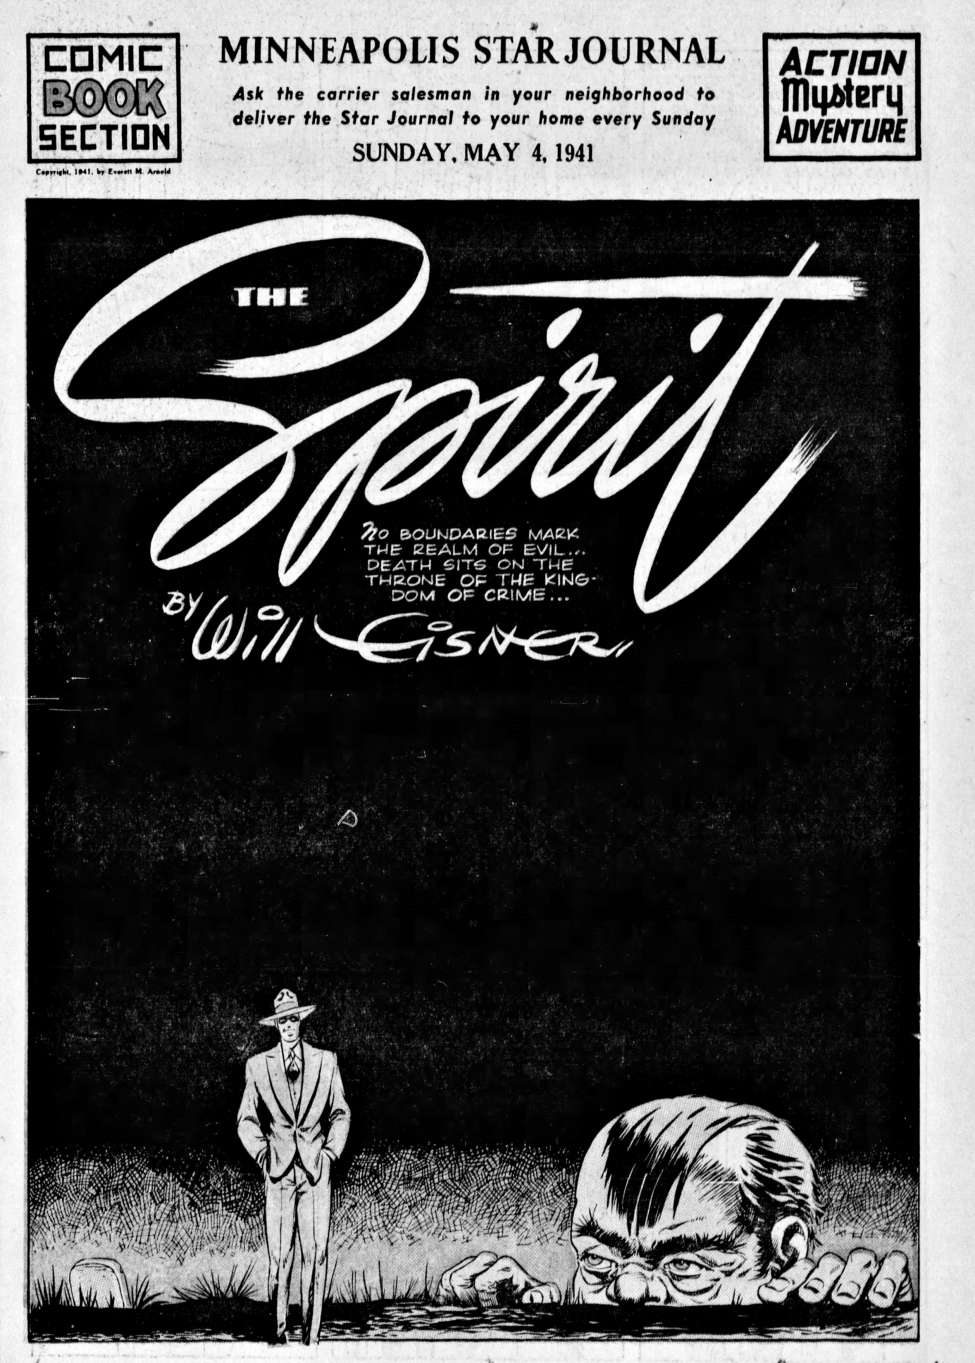 Book Cover For The Spirit (1941-05-04) - Minneapolis Star Journal (b/w)